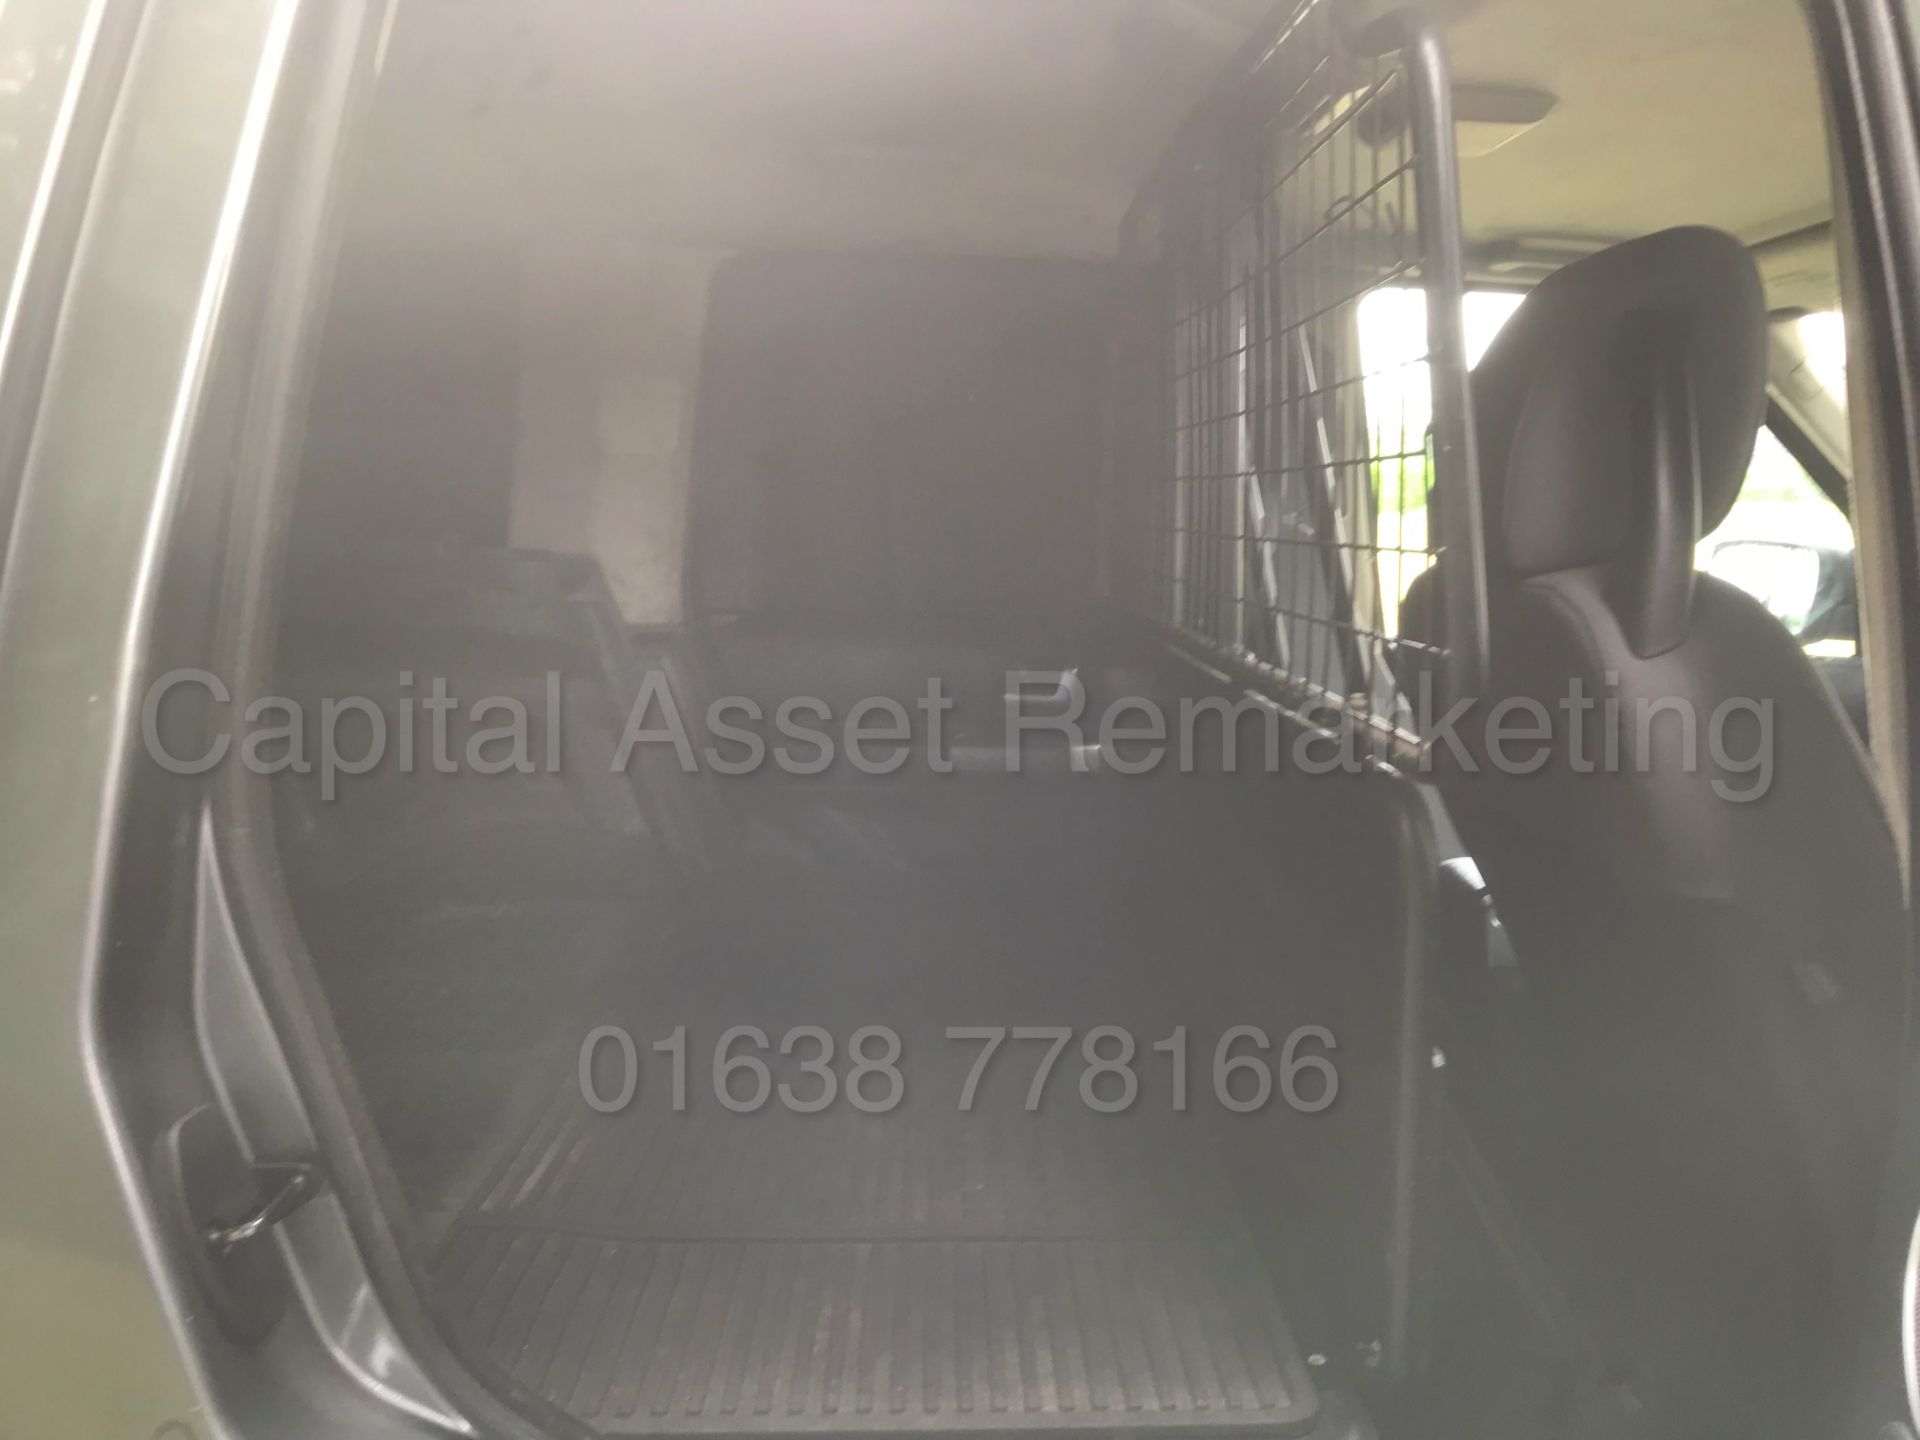 (On Sale) LAND ROVER DISCOVERY 3 'XS EDITION' **COMMERCIAL VAN**(2008 MODEL) 'TDV6-190 BHP' (NO VAT) - Image 24 of 38